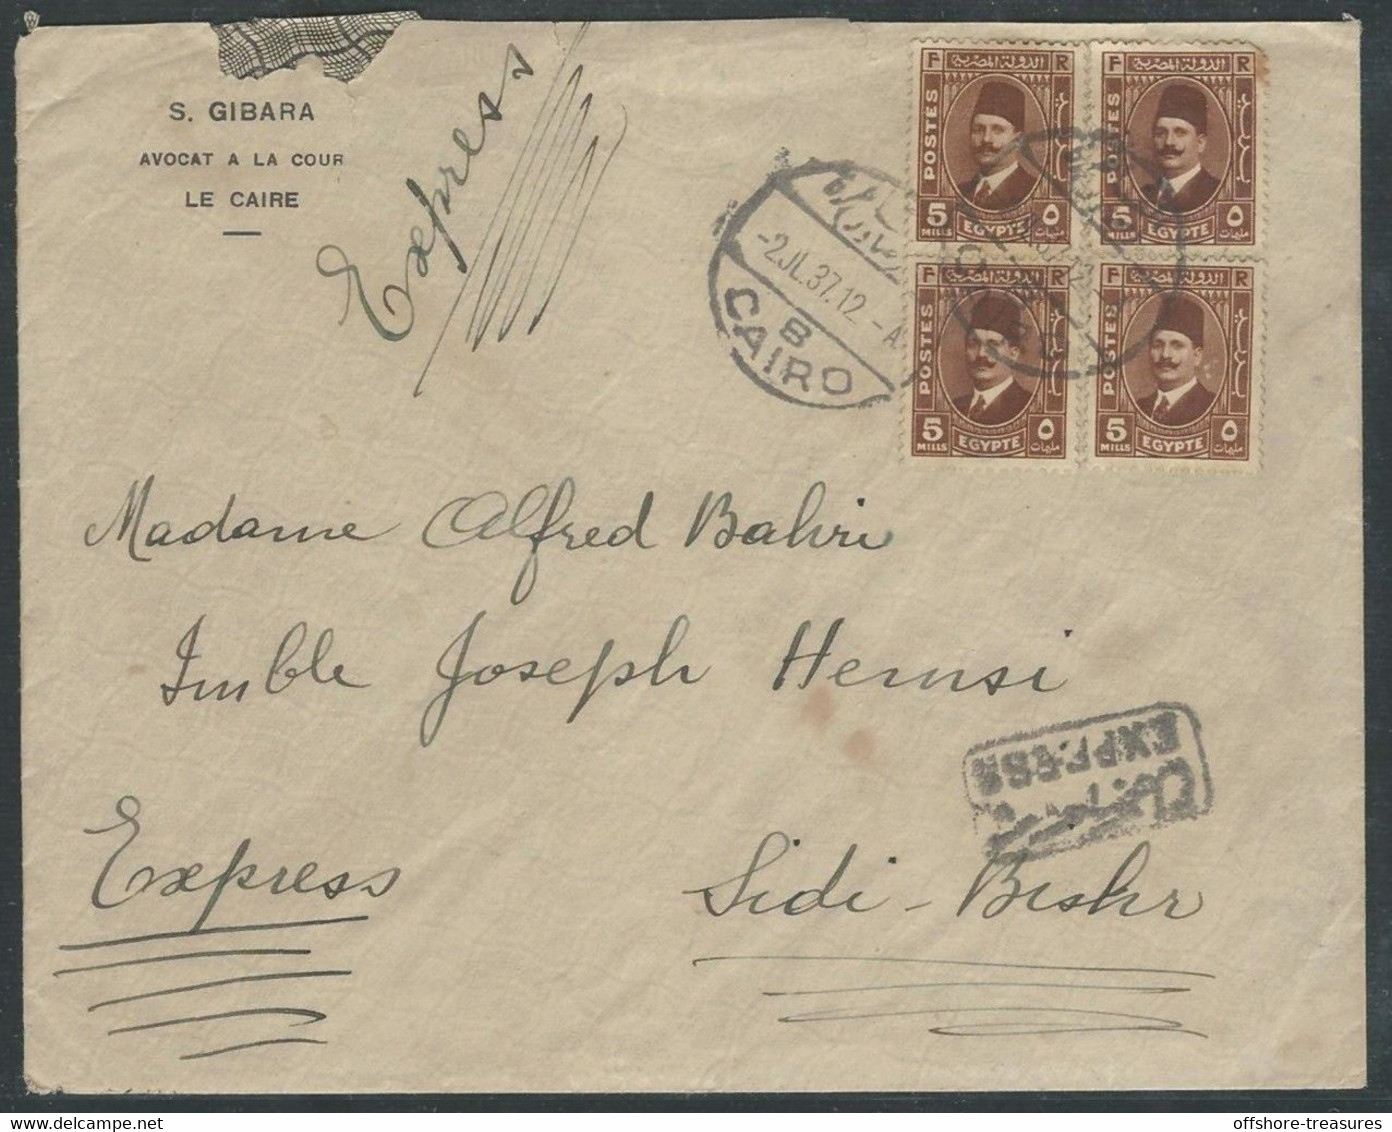 EGYPT 1937 Express Cover 20 Mills King Fuad / Fouad Stamp Usage Rare Example /Not Motorcycle - Cairo To Alexandria - 1915-1921 Protectorat Britannique